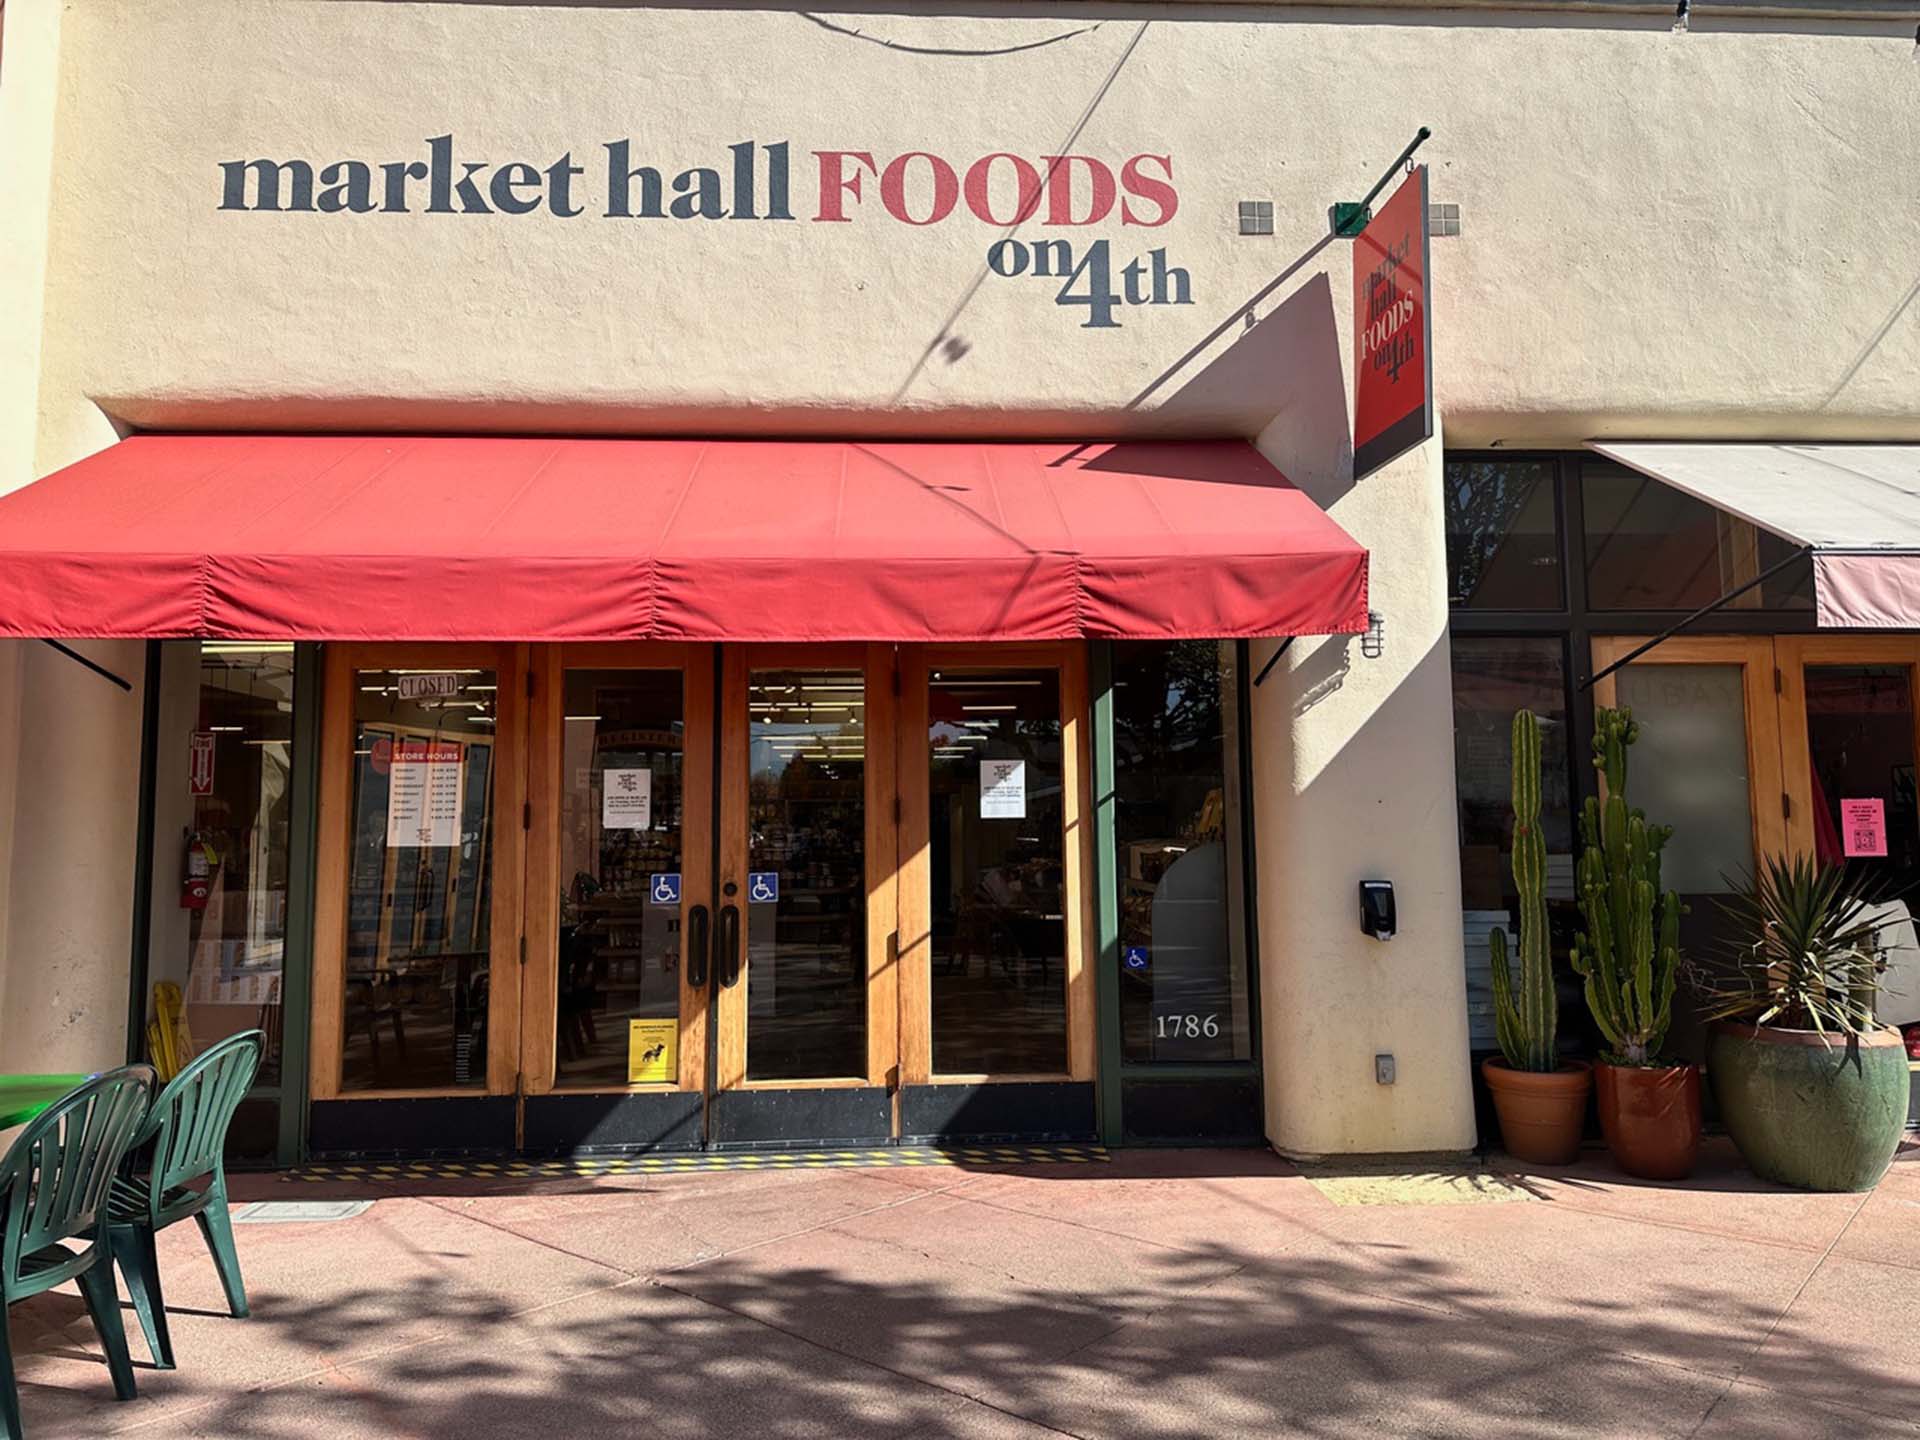 Exterior facade of a specialty grocery store. The sign reads, "Market Hall Foods on 4th."